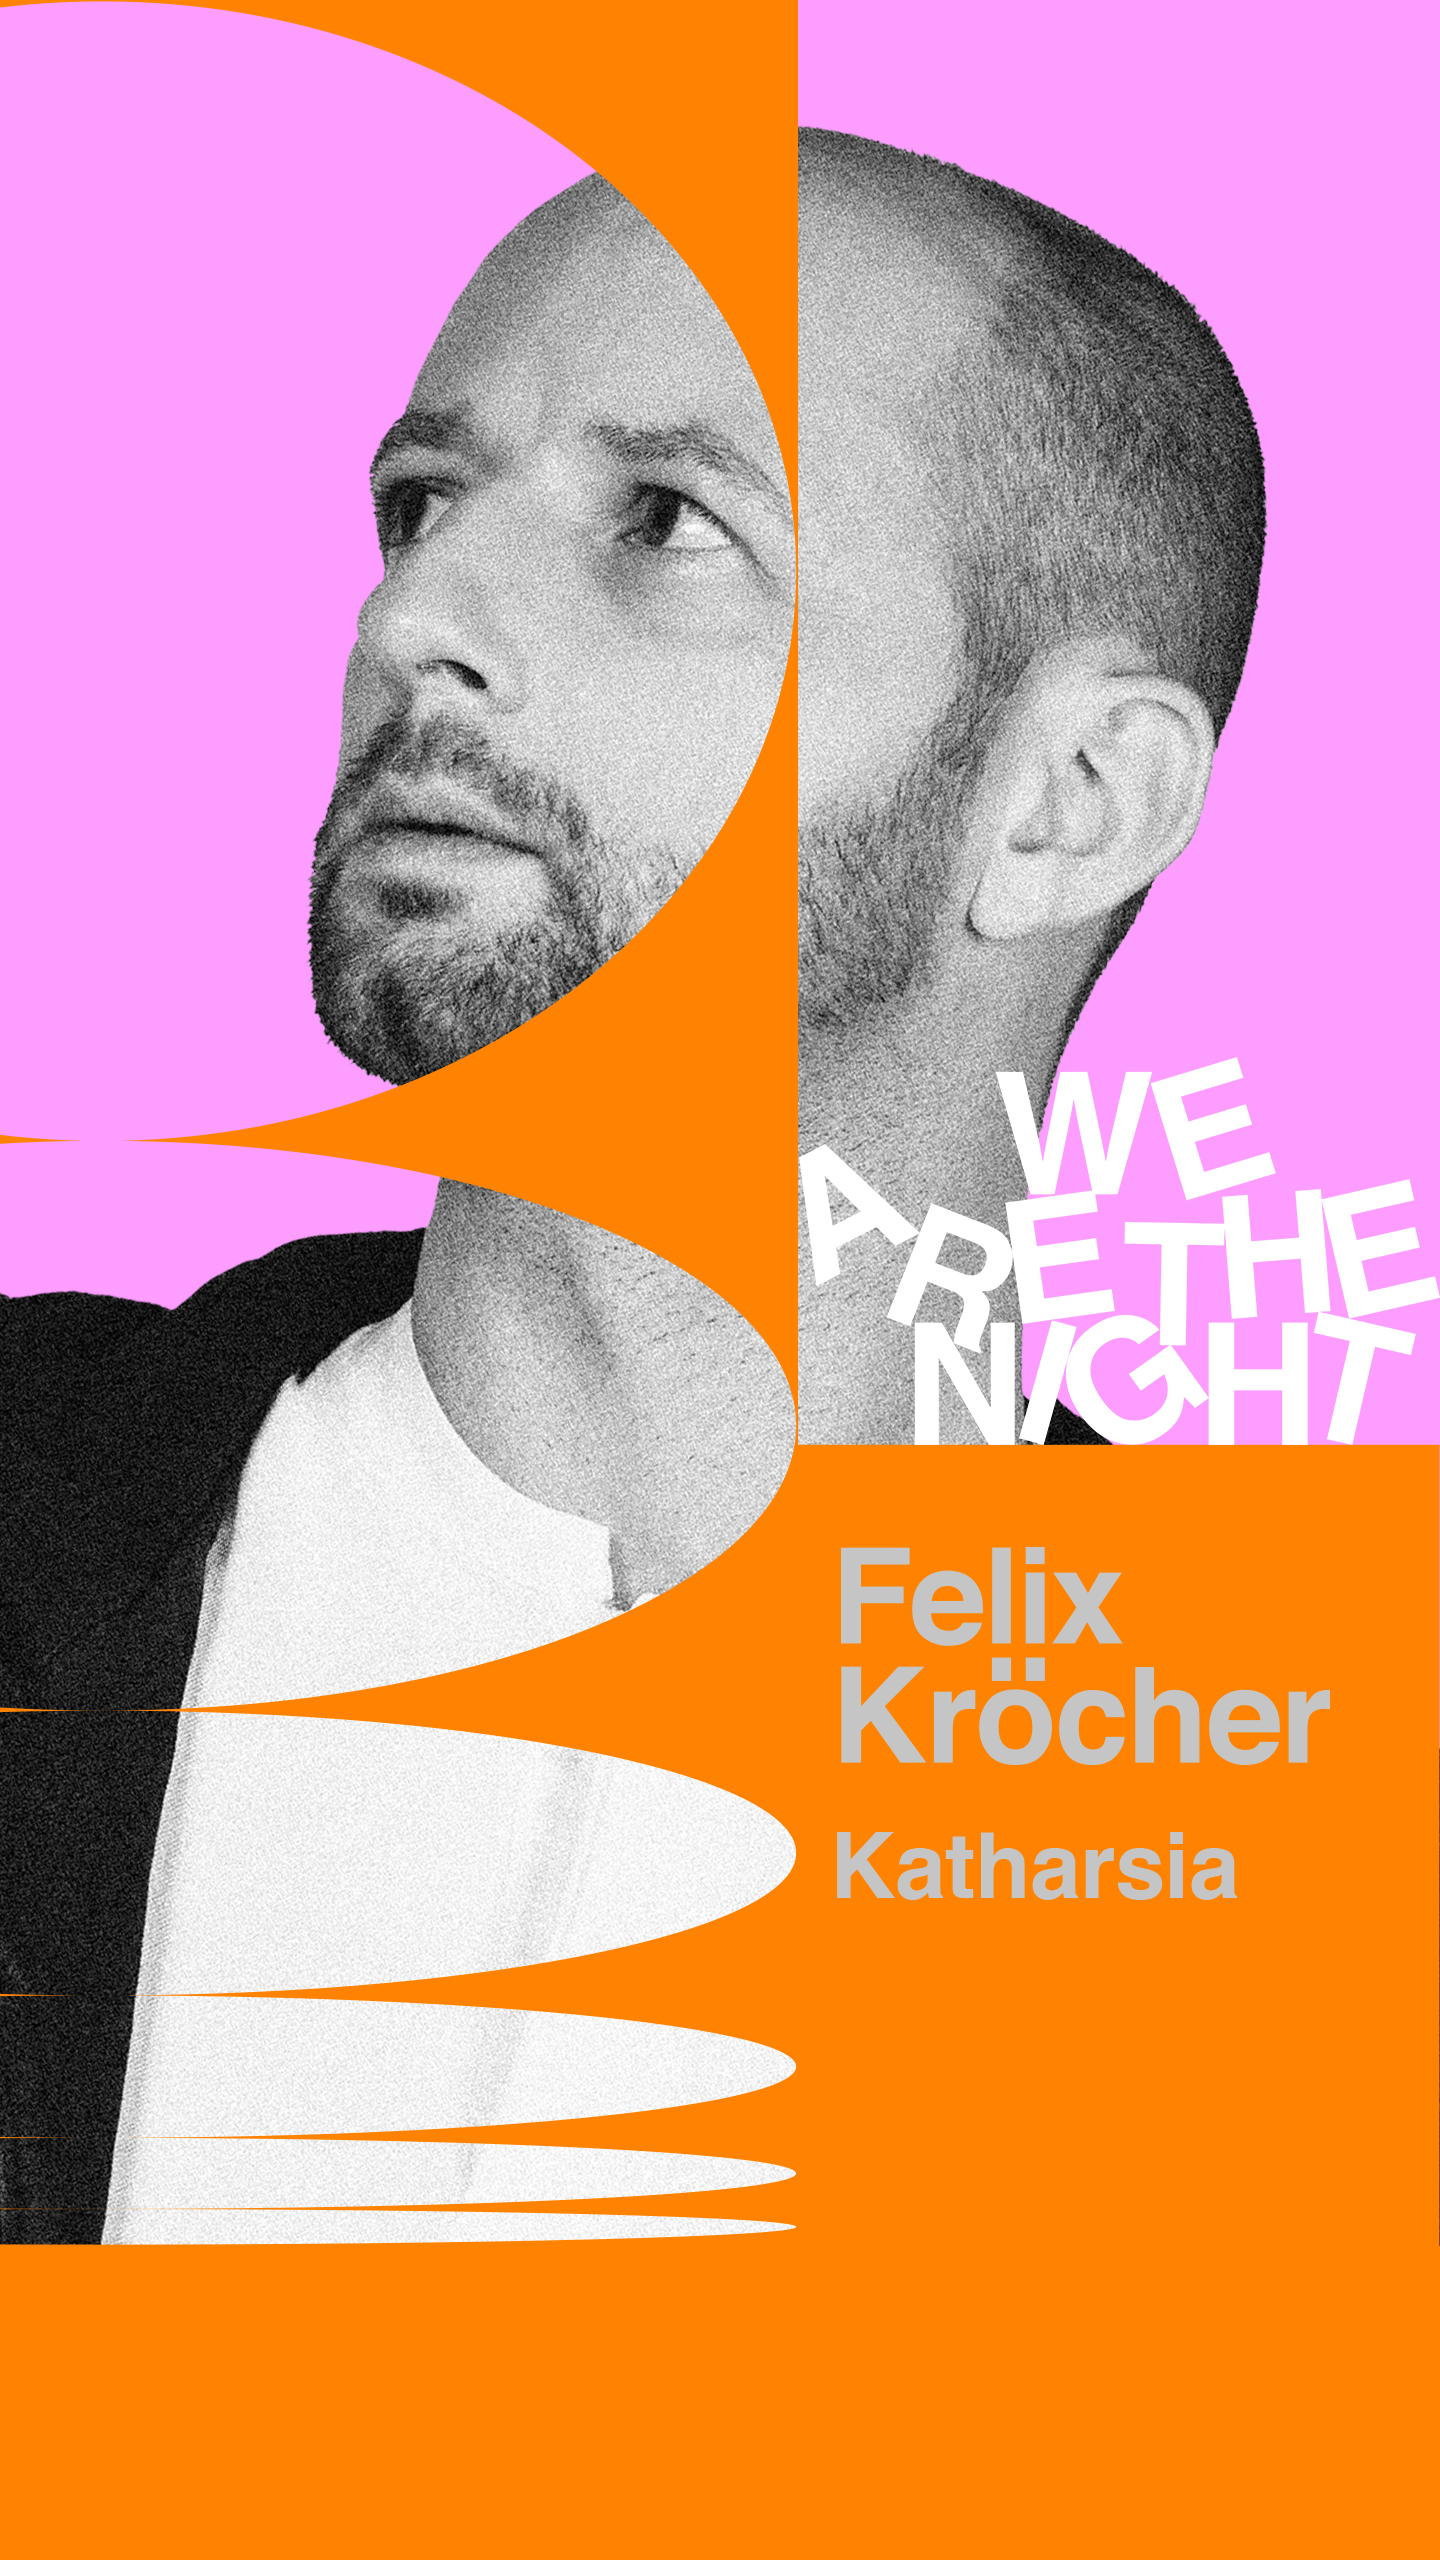 We Are The Night with Felix Kröcher - フライヤー表